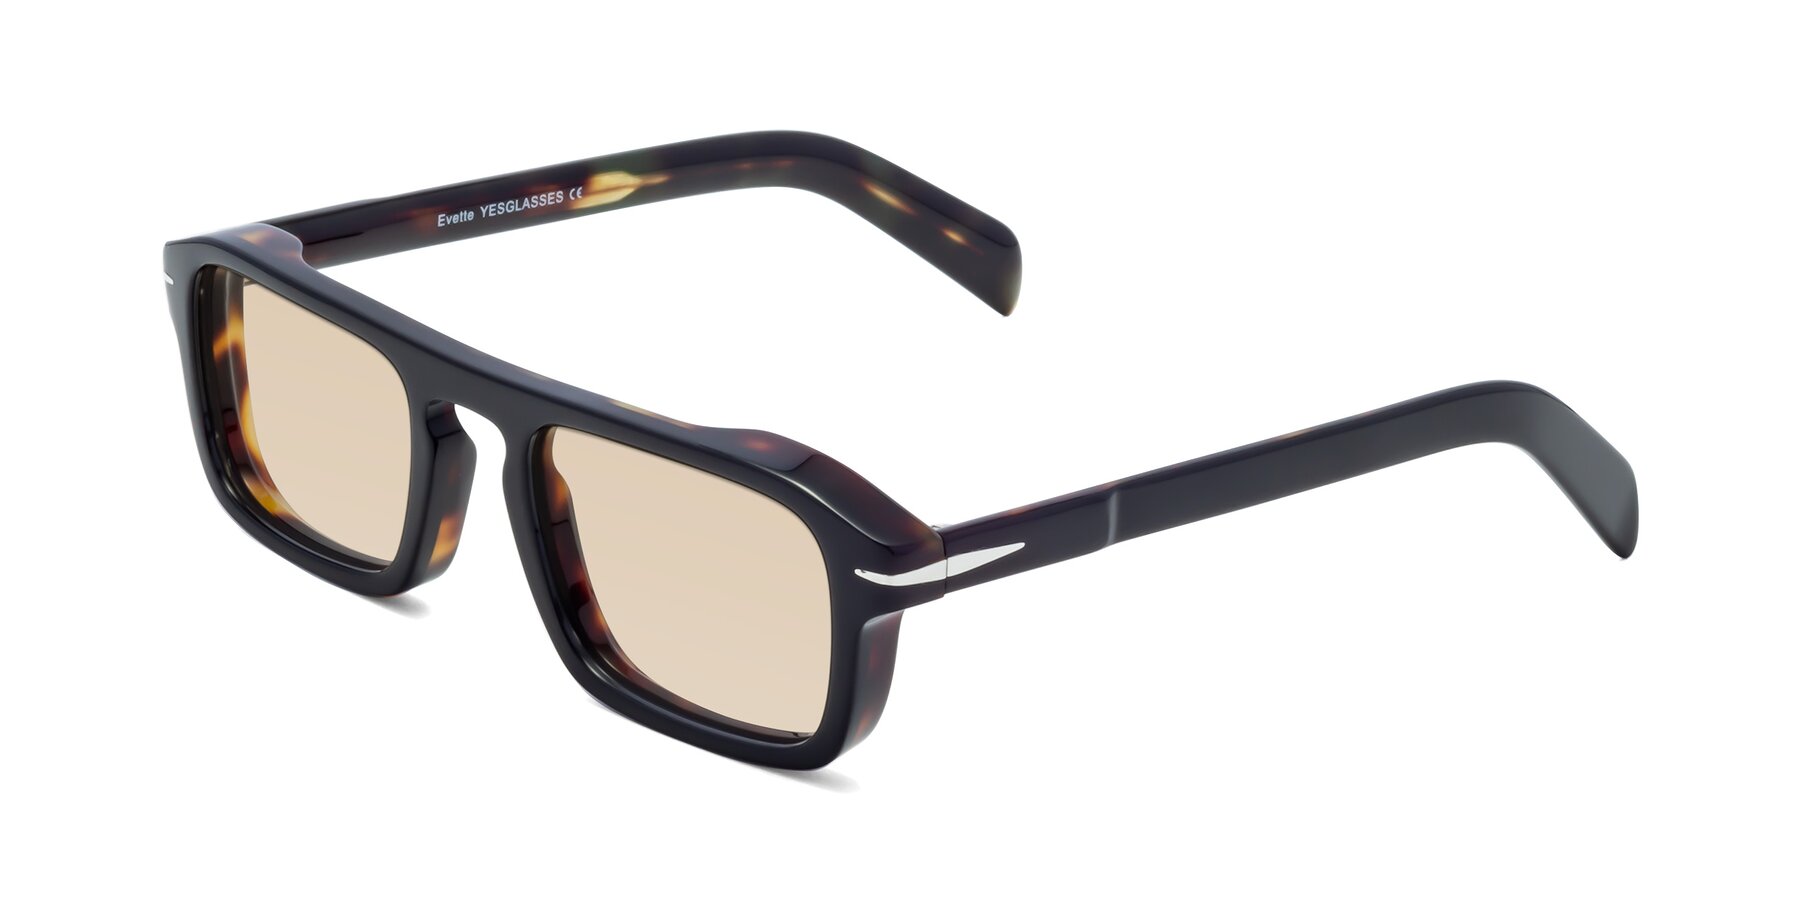 Angle of Evette in Black-Tortoise with Light Brown Tinted Lenses